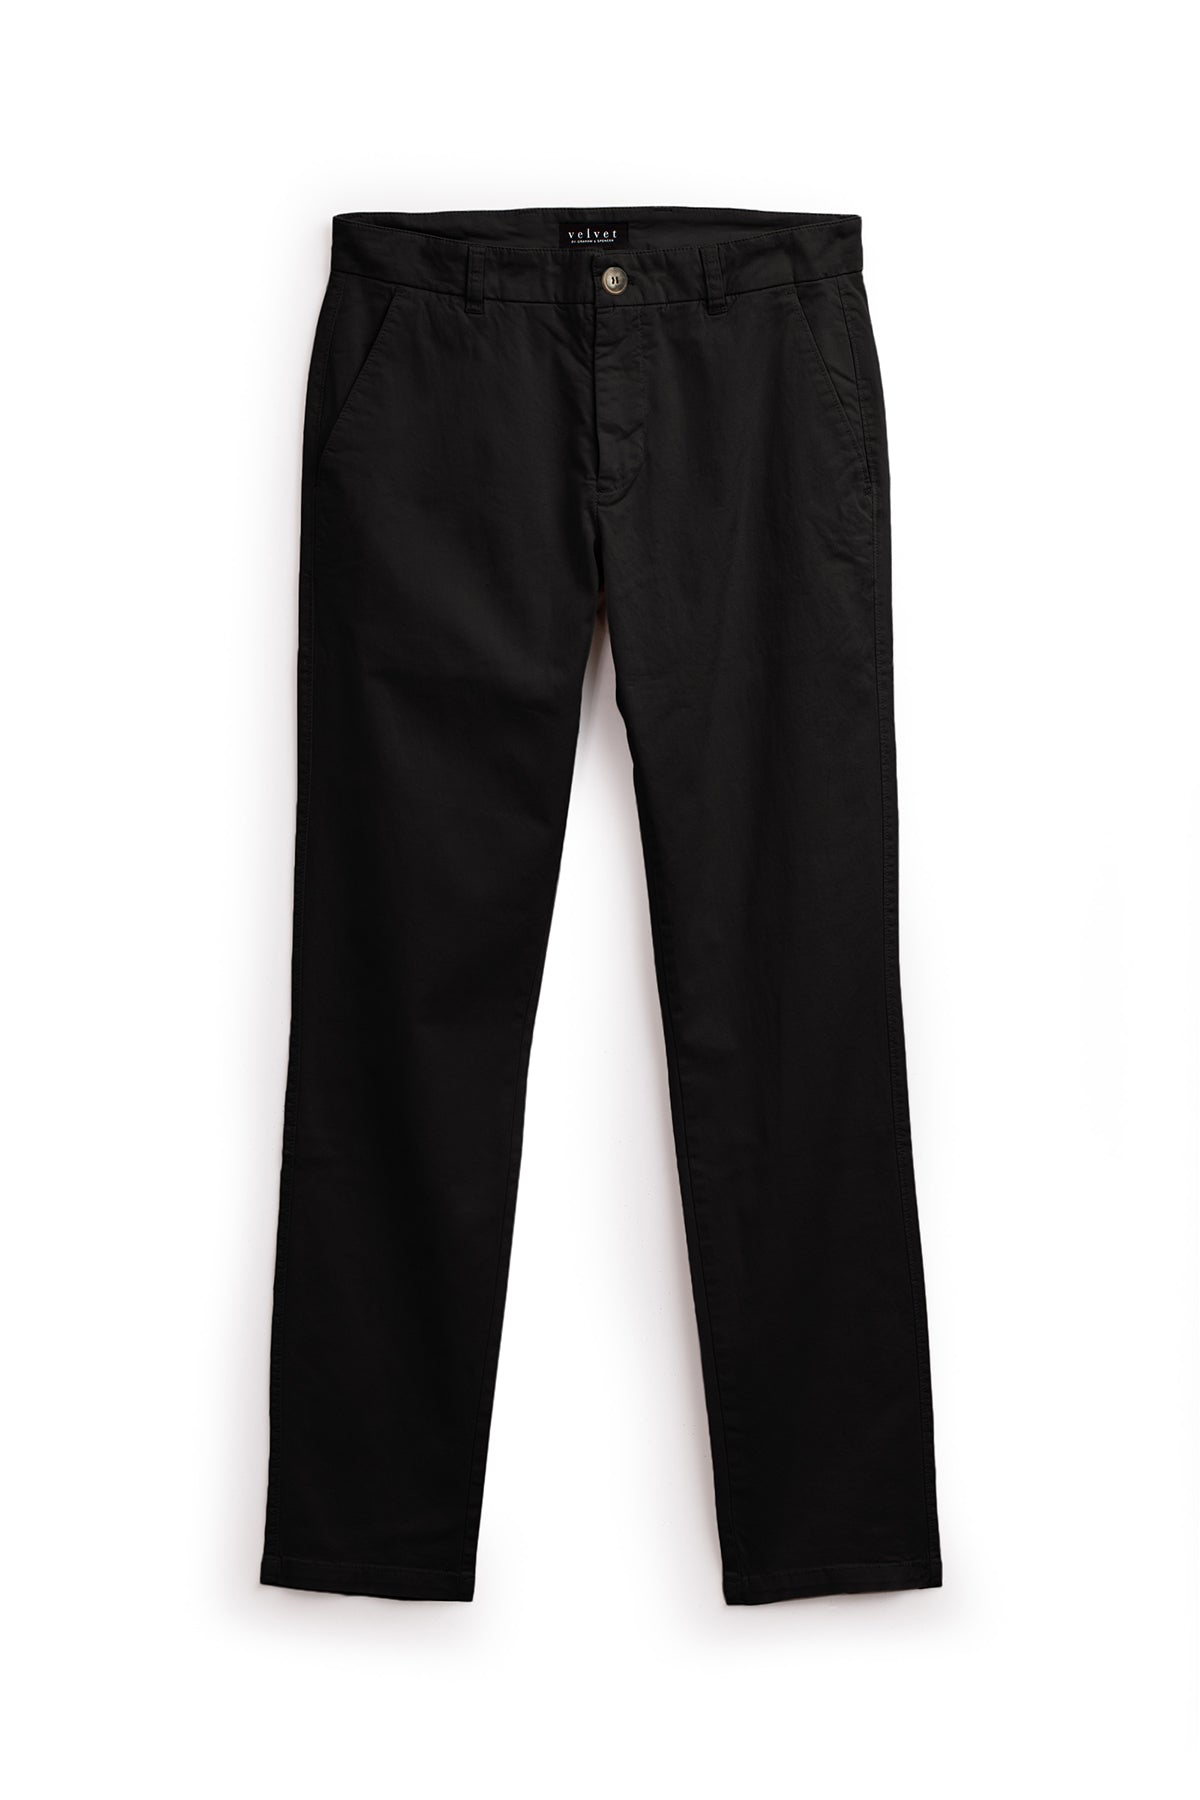   Velvet by Graham & Spencer's BROGAN COTTON TWILL PANT in flawless fit black chino pants on a white background. 